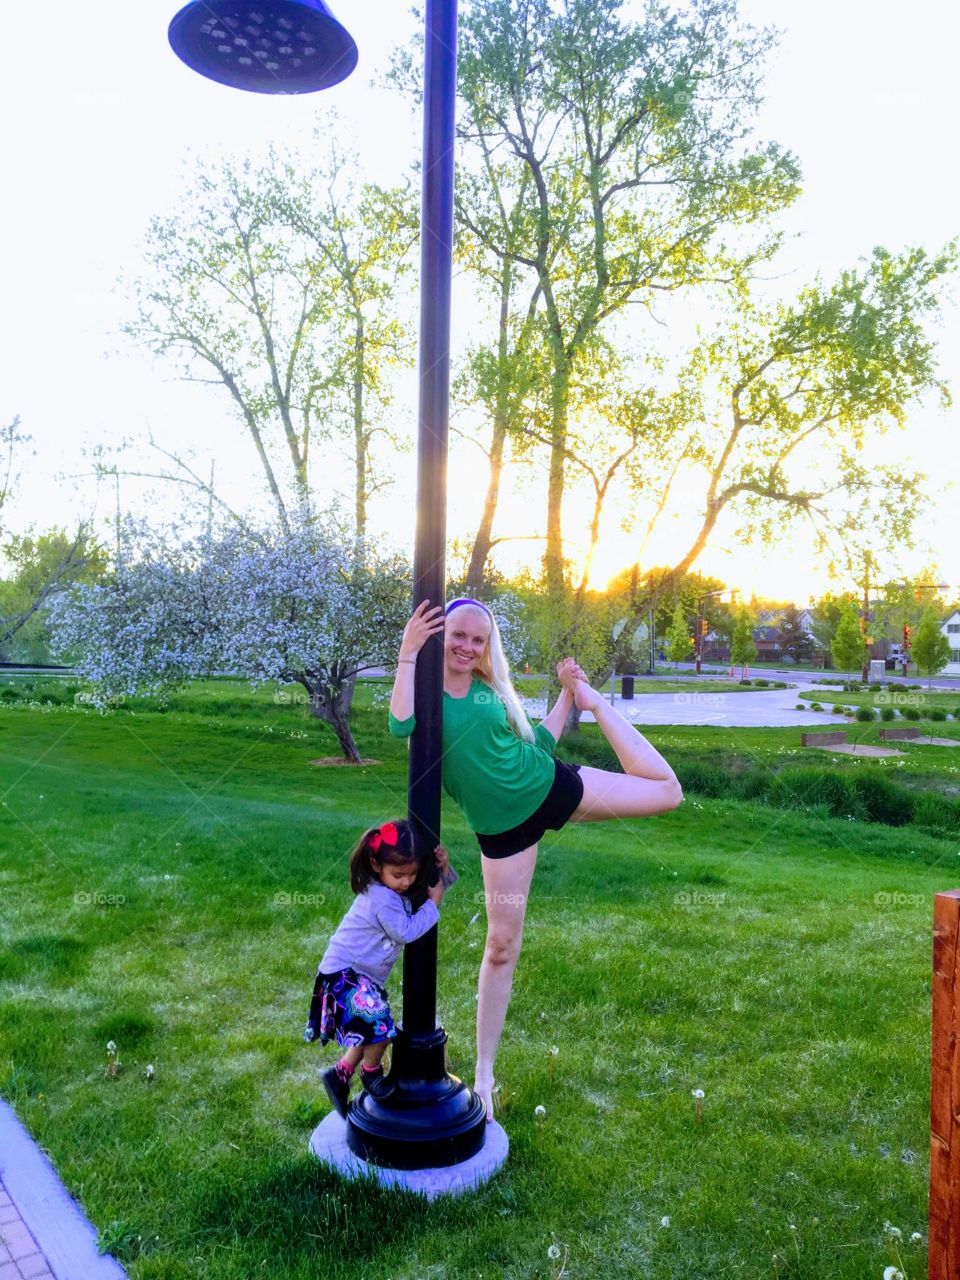 mother practicing yoga poses in the park with her young daughter.
surrounded by lush green grass and trees and flowers